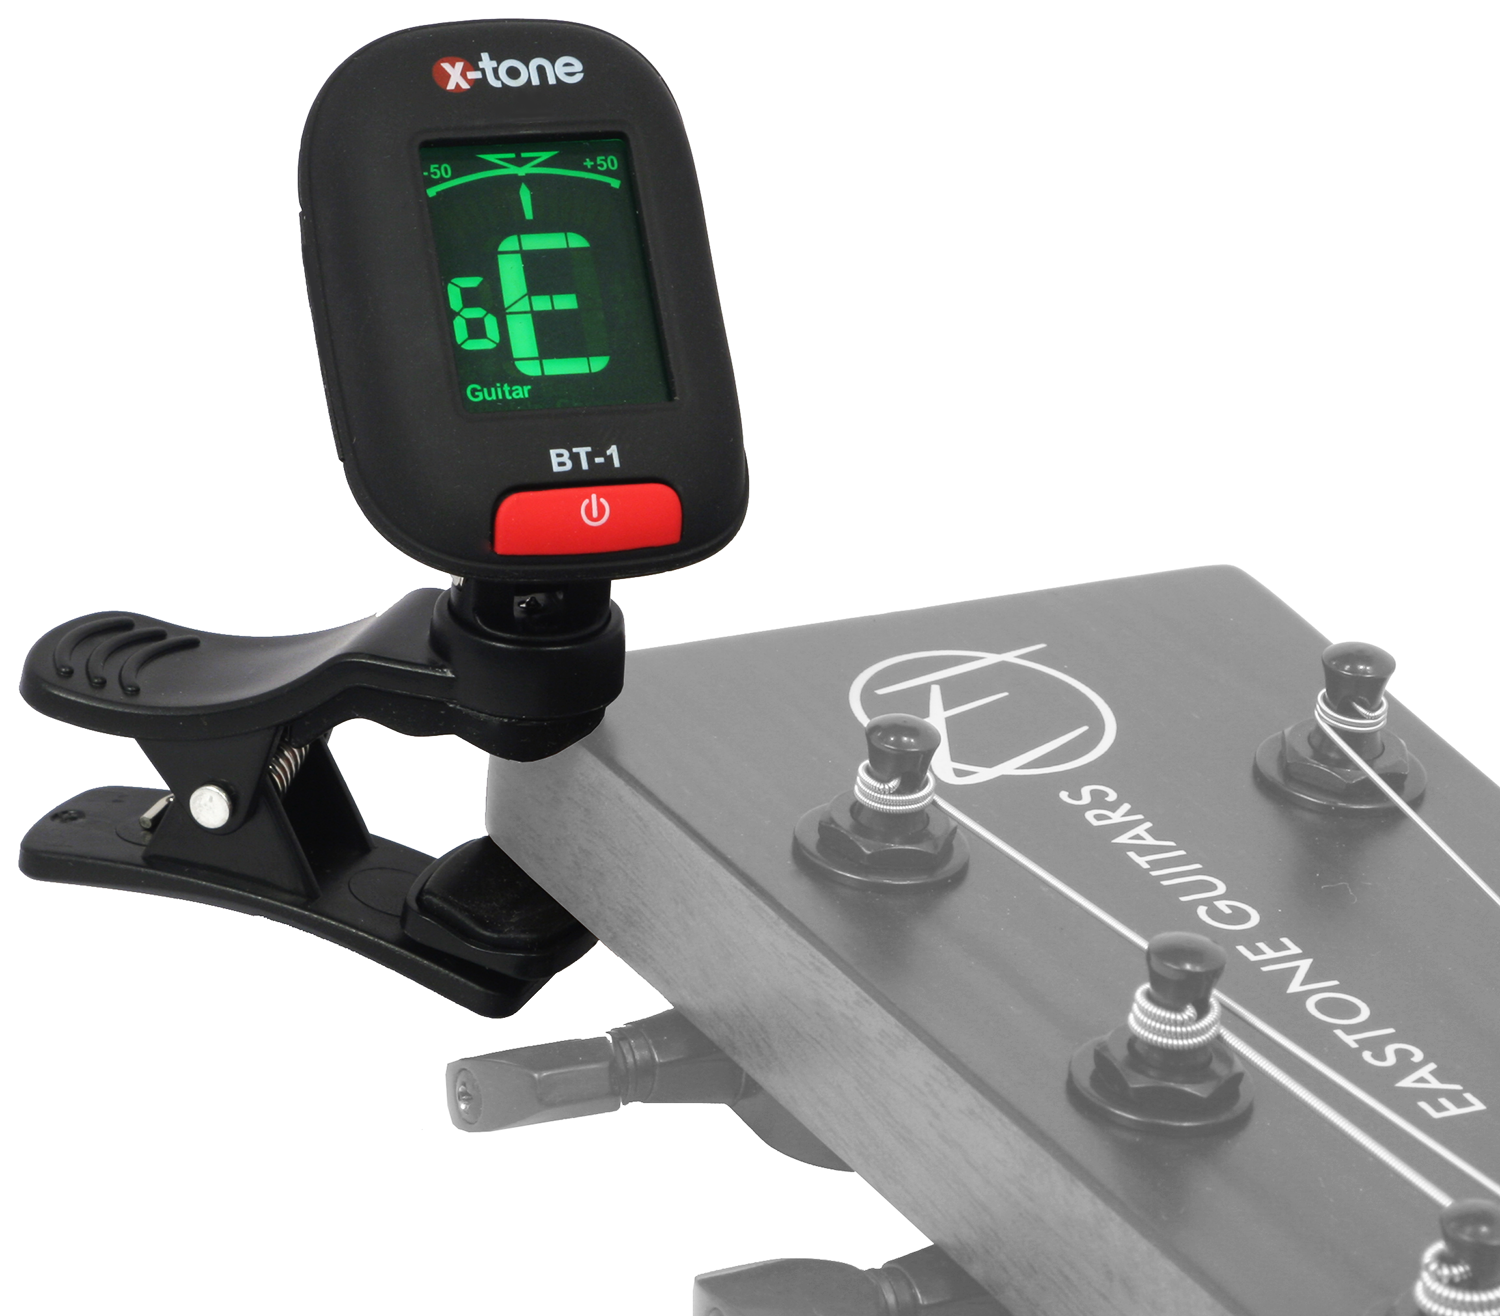 X-tone 3110 Clip-on Tuner Pince - Guitar tuner - Variation 2